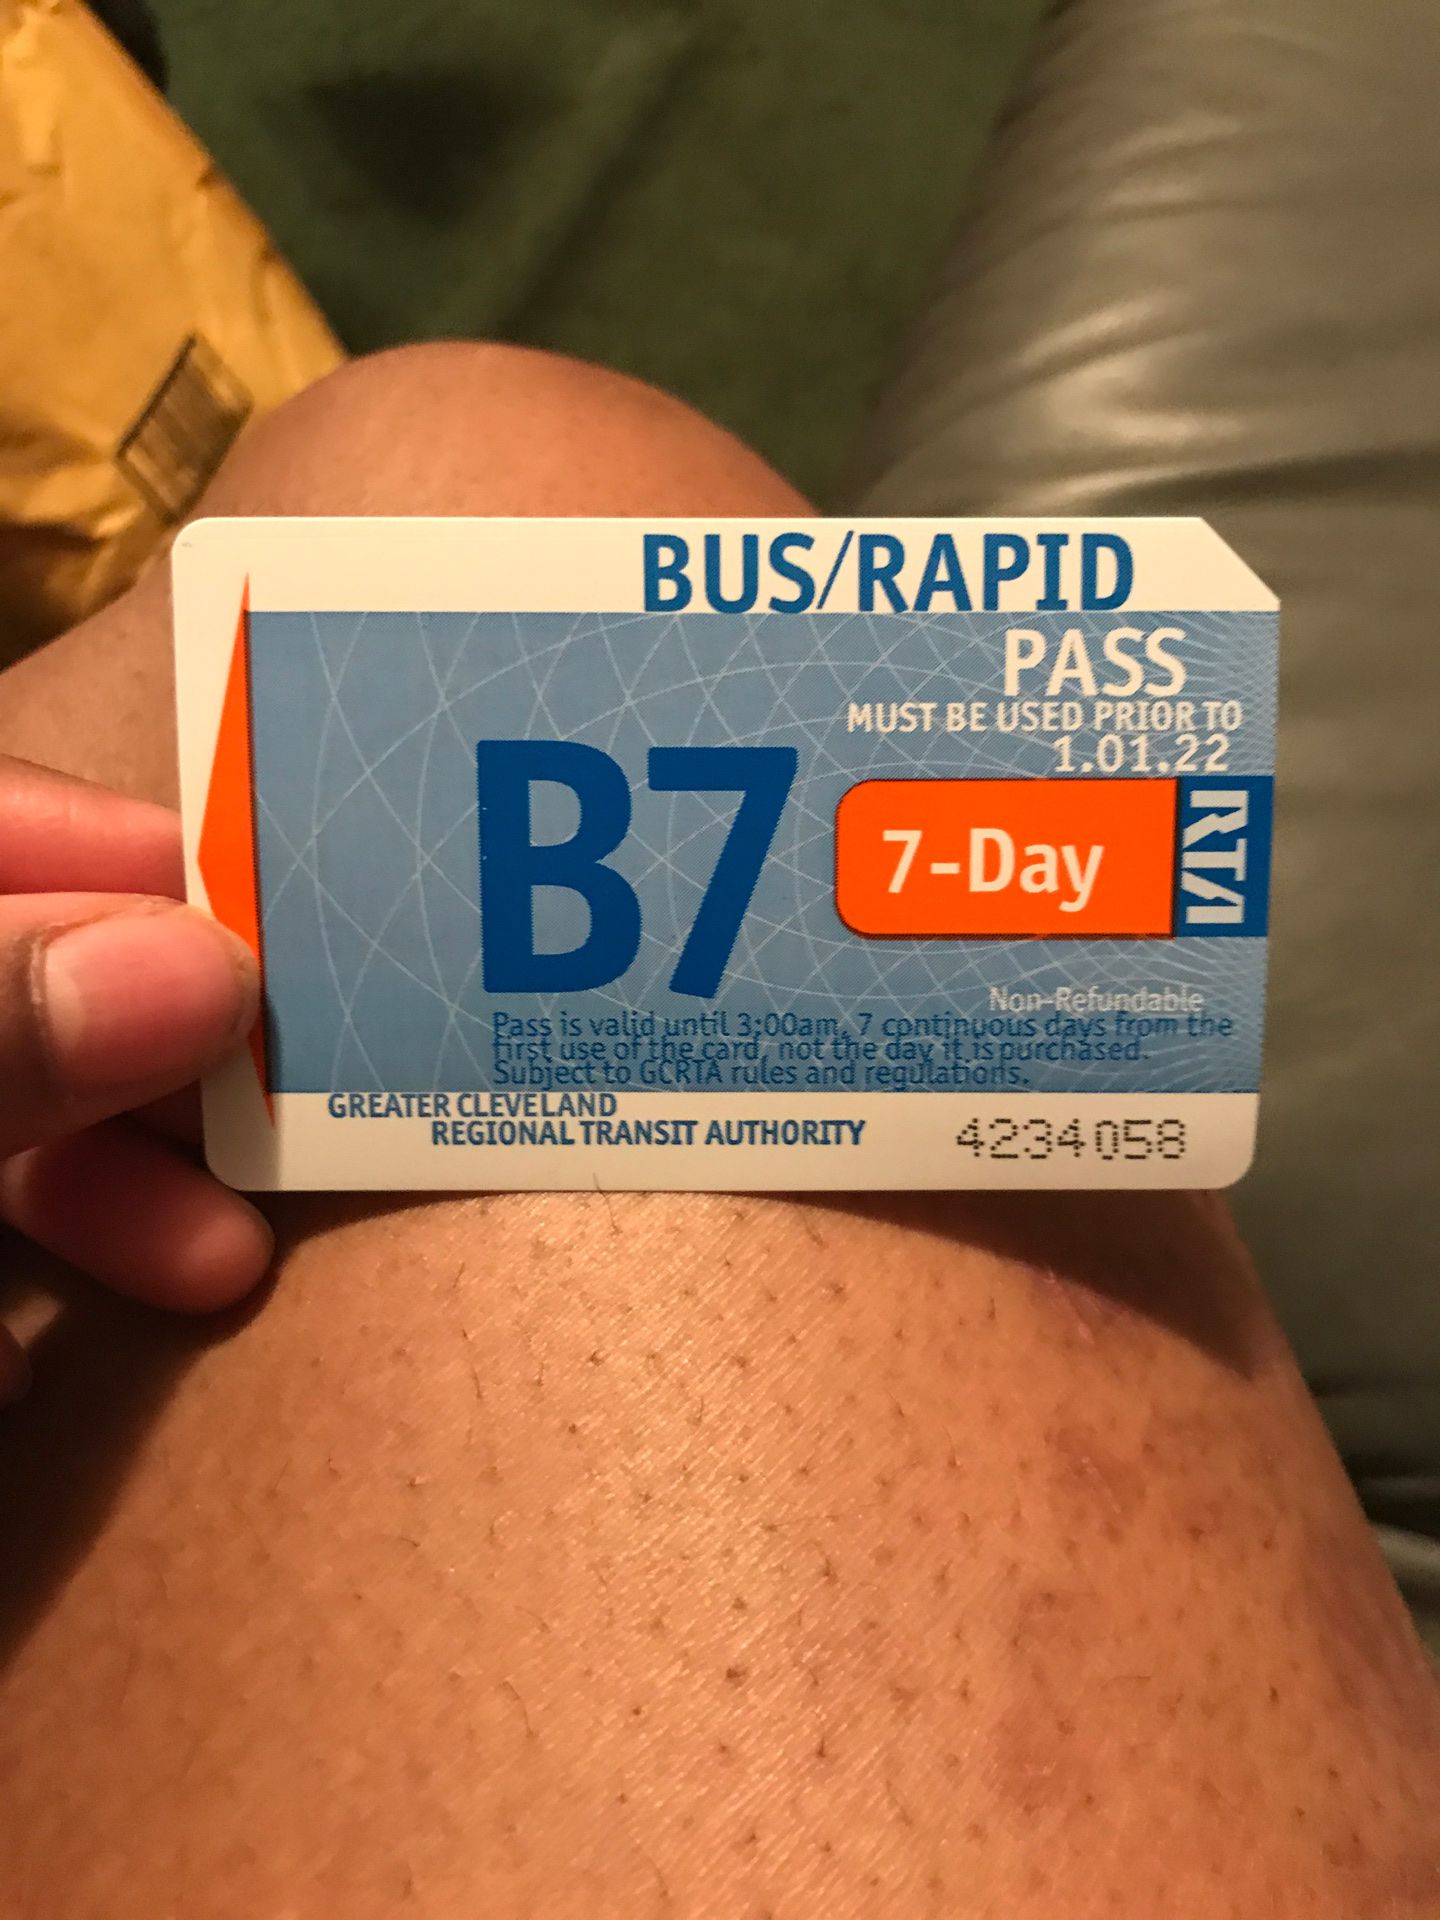 7 day bus pass never used